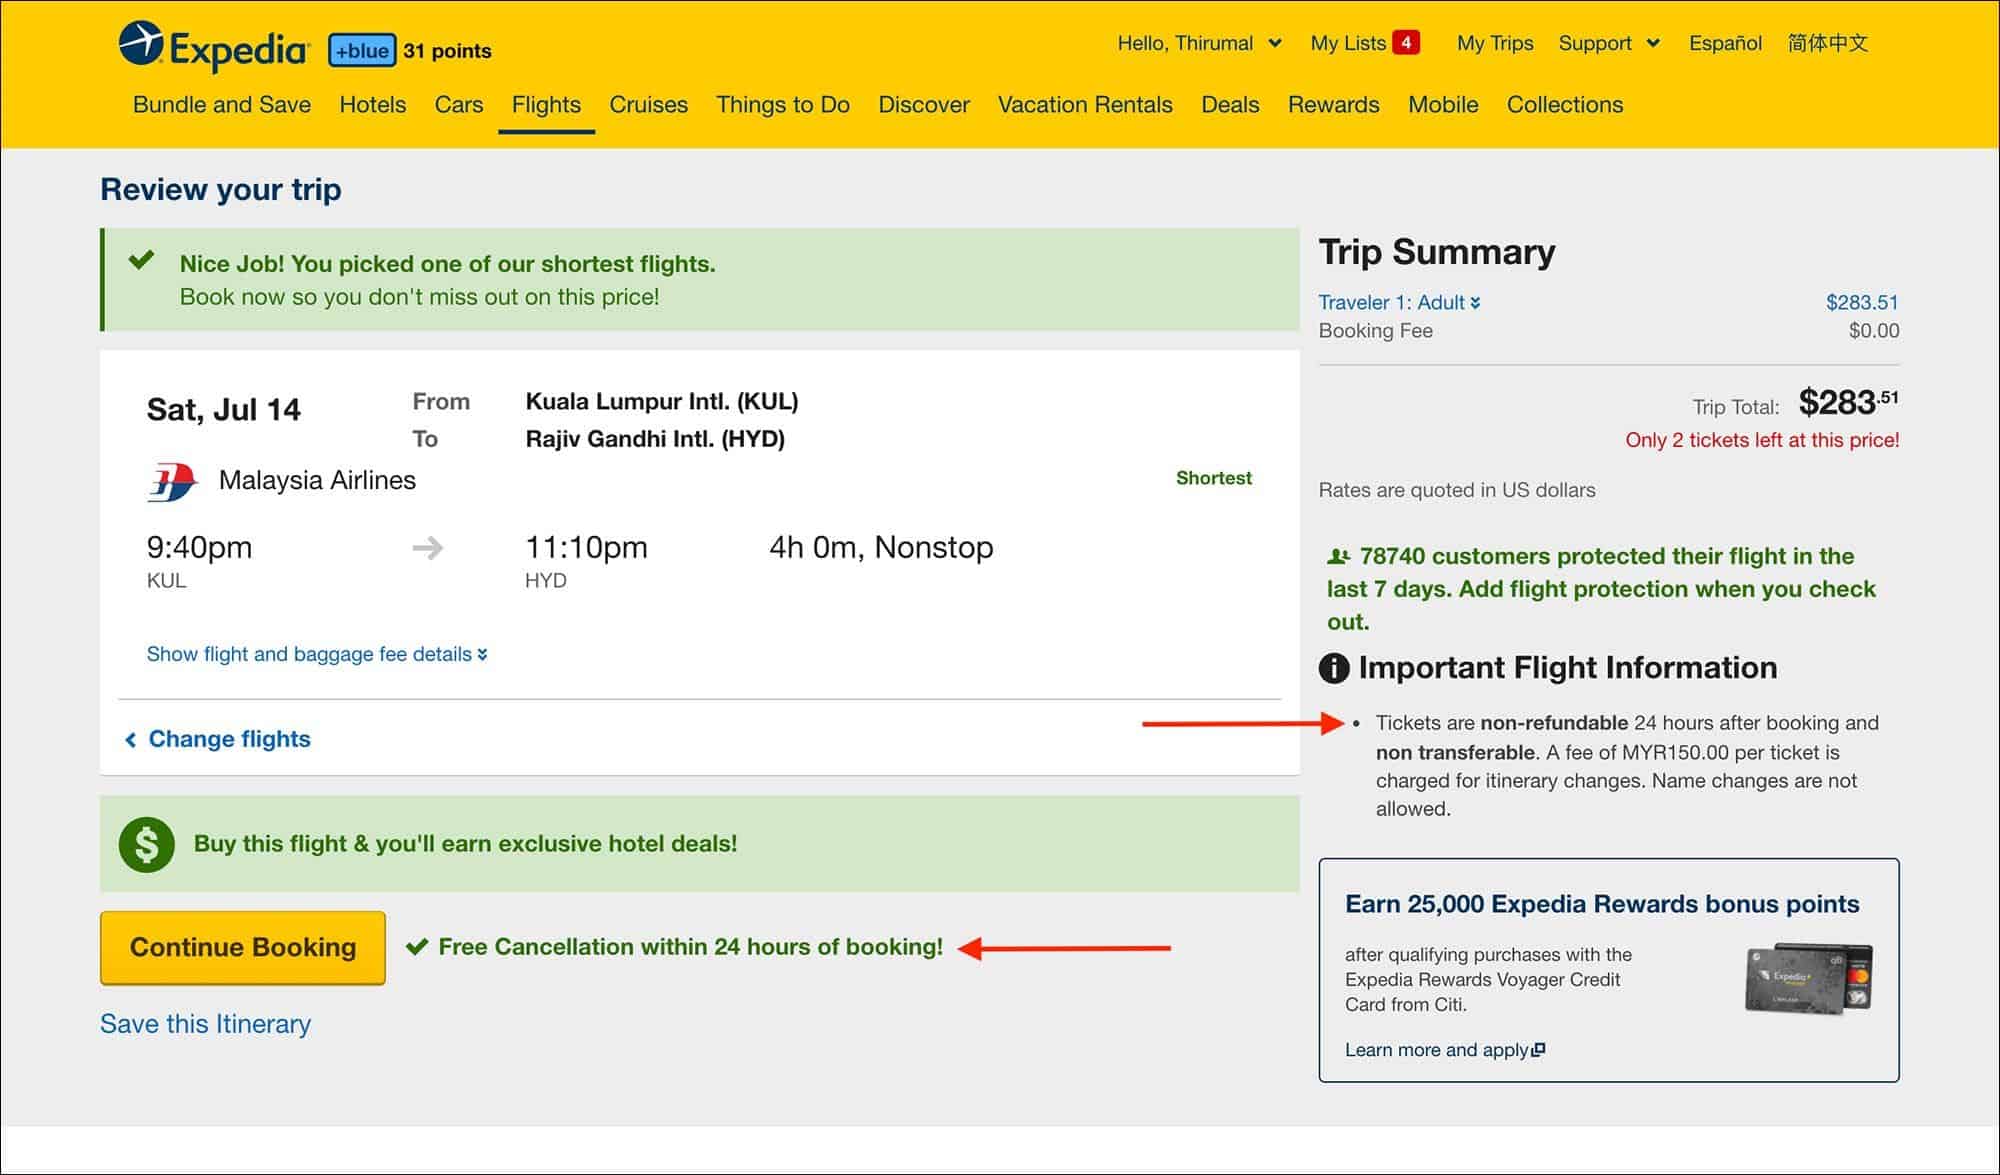 Book Flight Tickets with 24 hour FREE cancellation on Expedia - Review your Flight